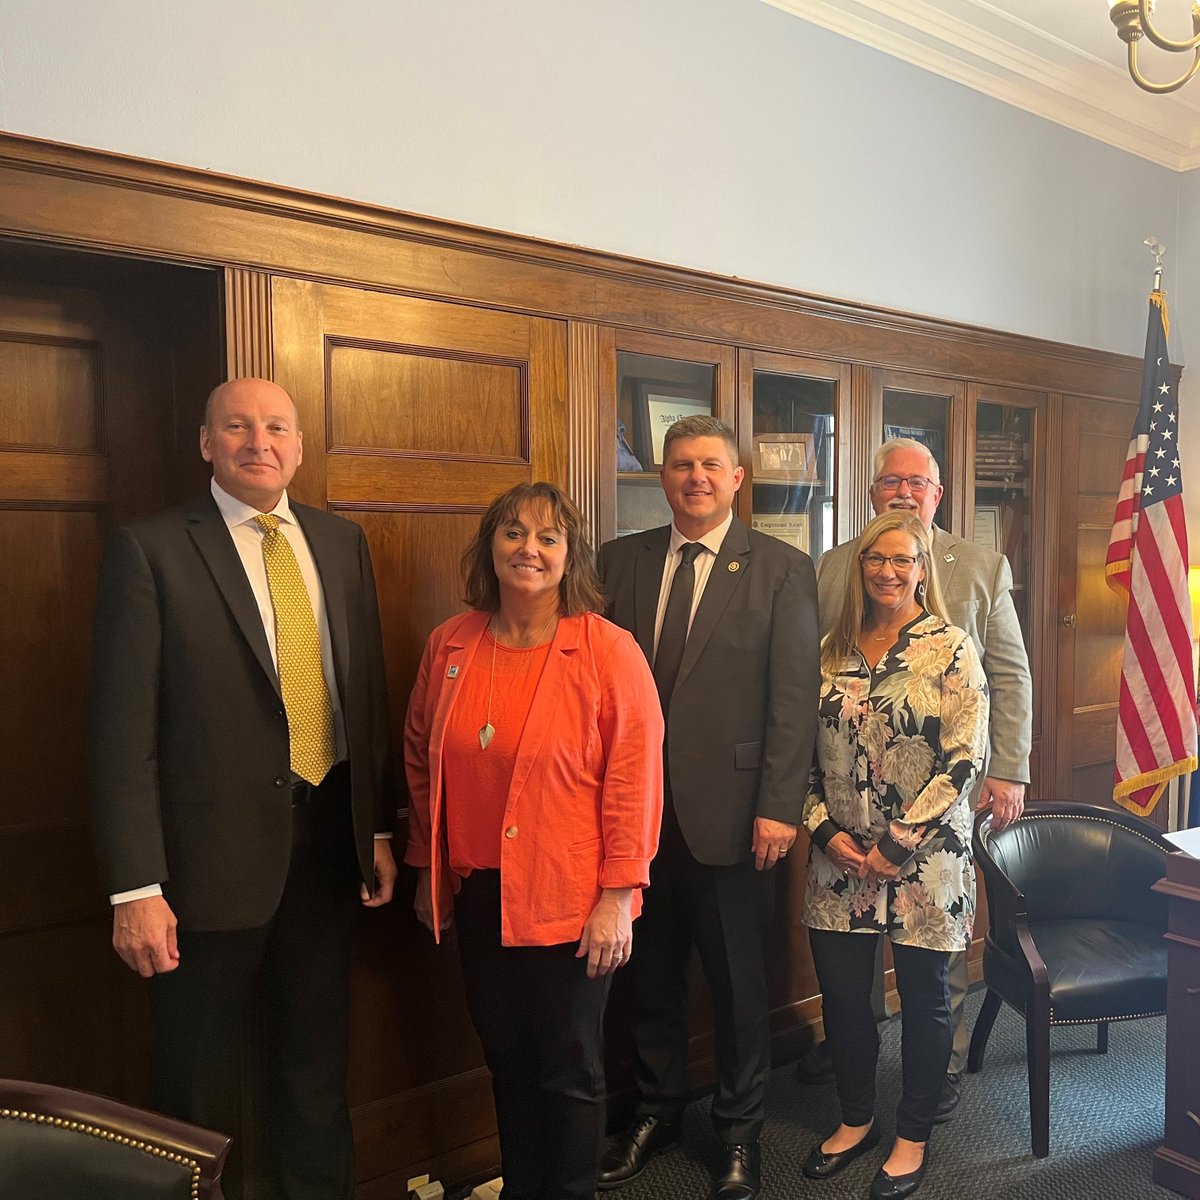 In the technologically advanced world we live in, it is important, now more than ever, that we ensure rural communities have access to the broadband infrastructure they need. I met with @MNTAnews to discuss all of the important work they're doing to bridge the digital divide.